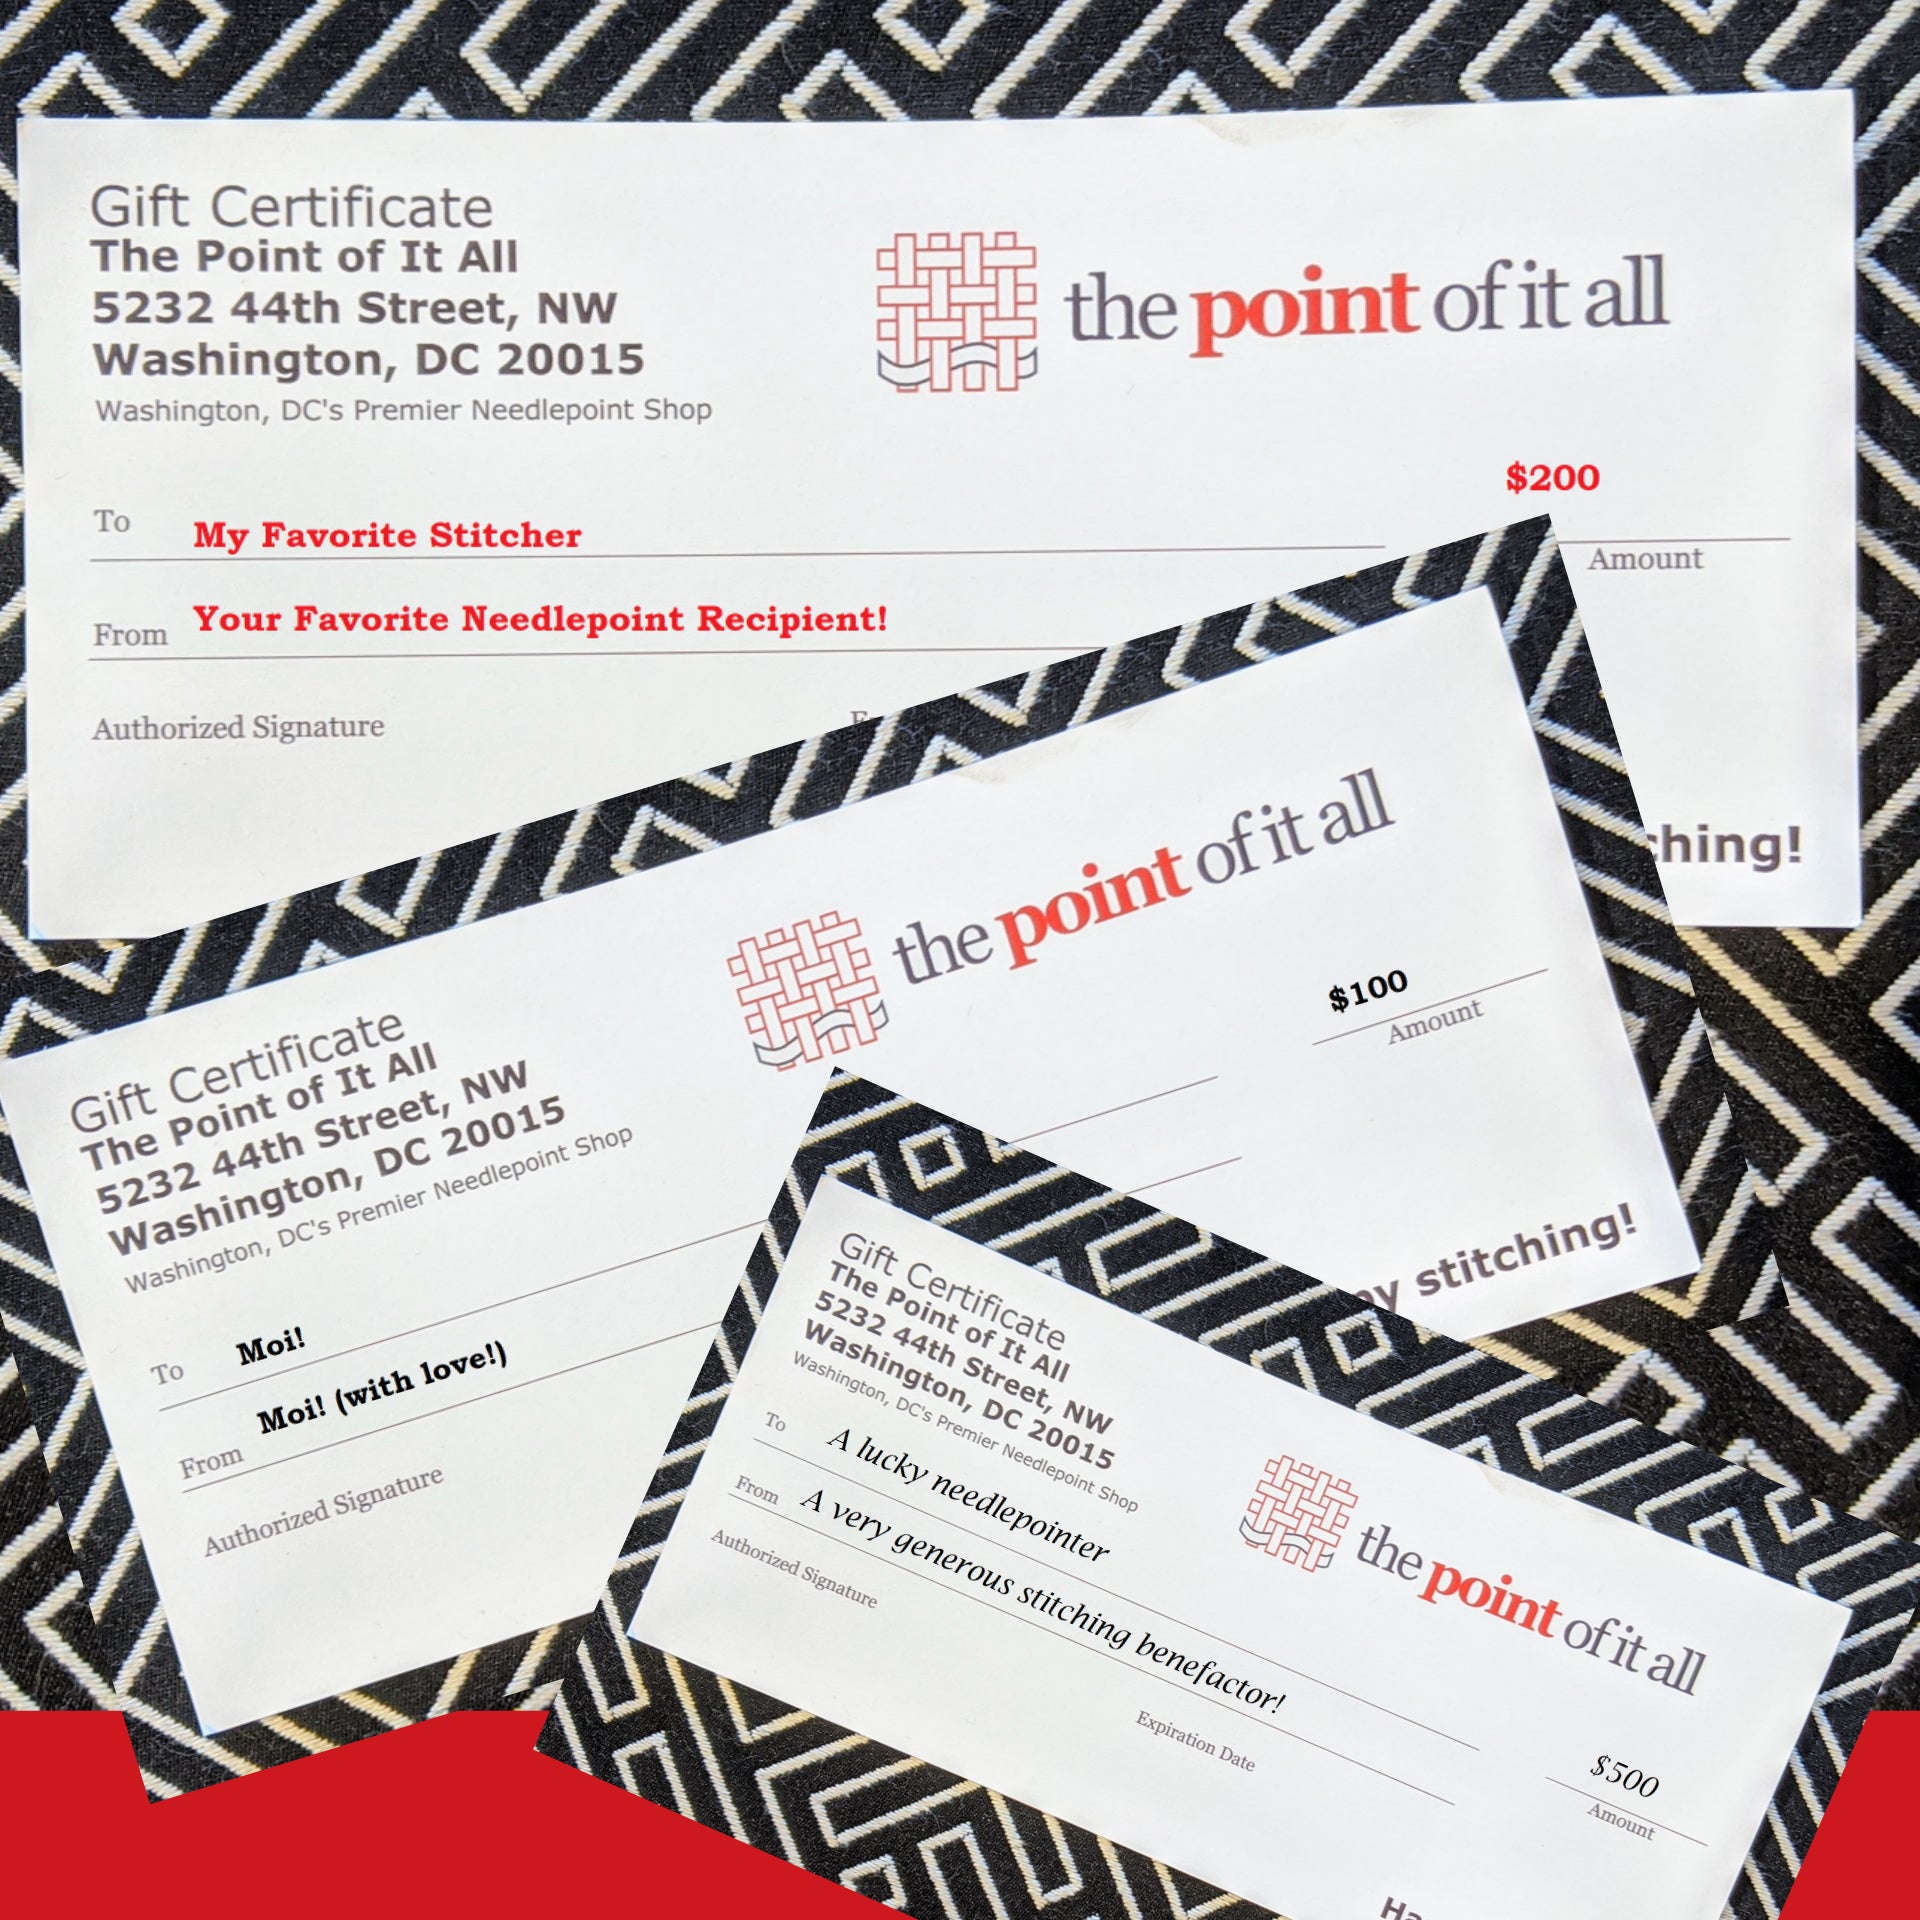 South Point Gift Certificate